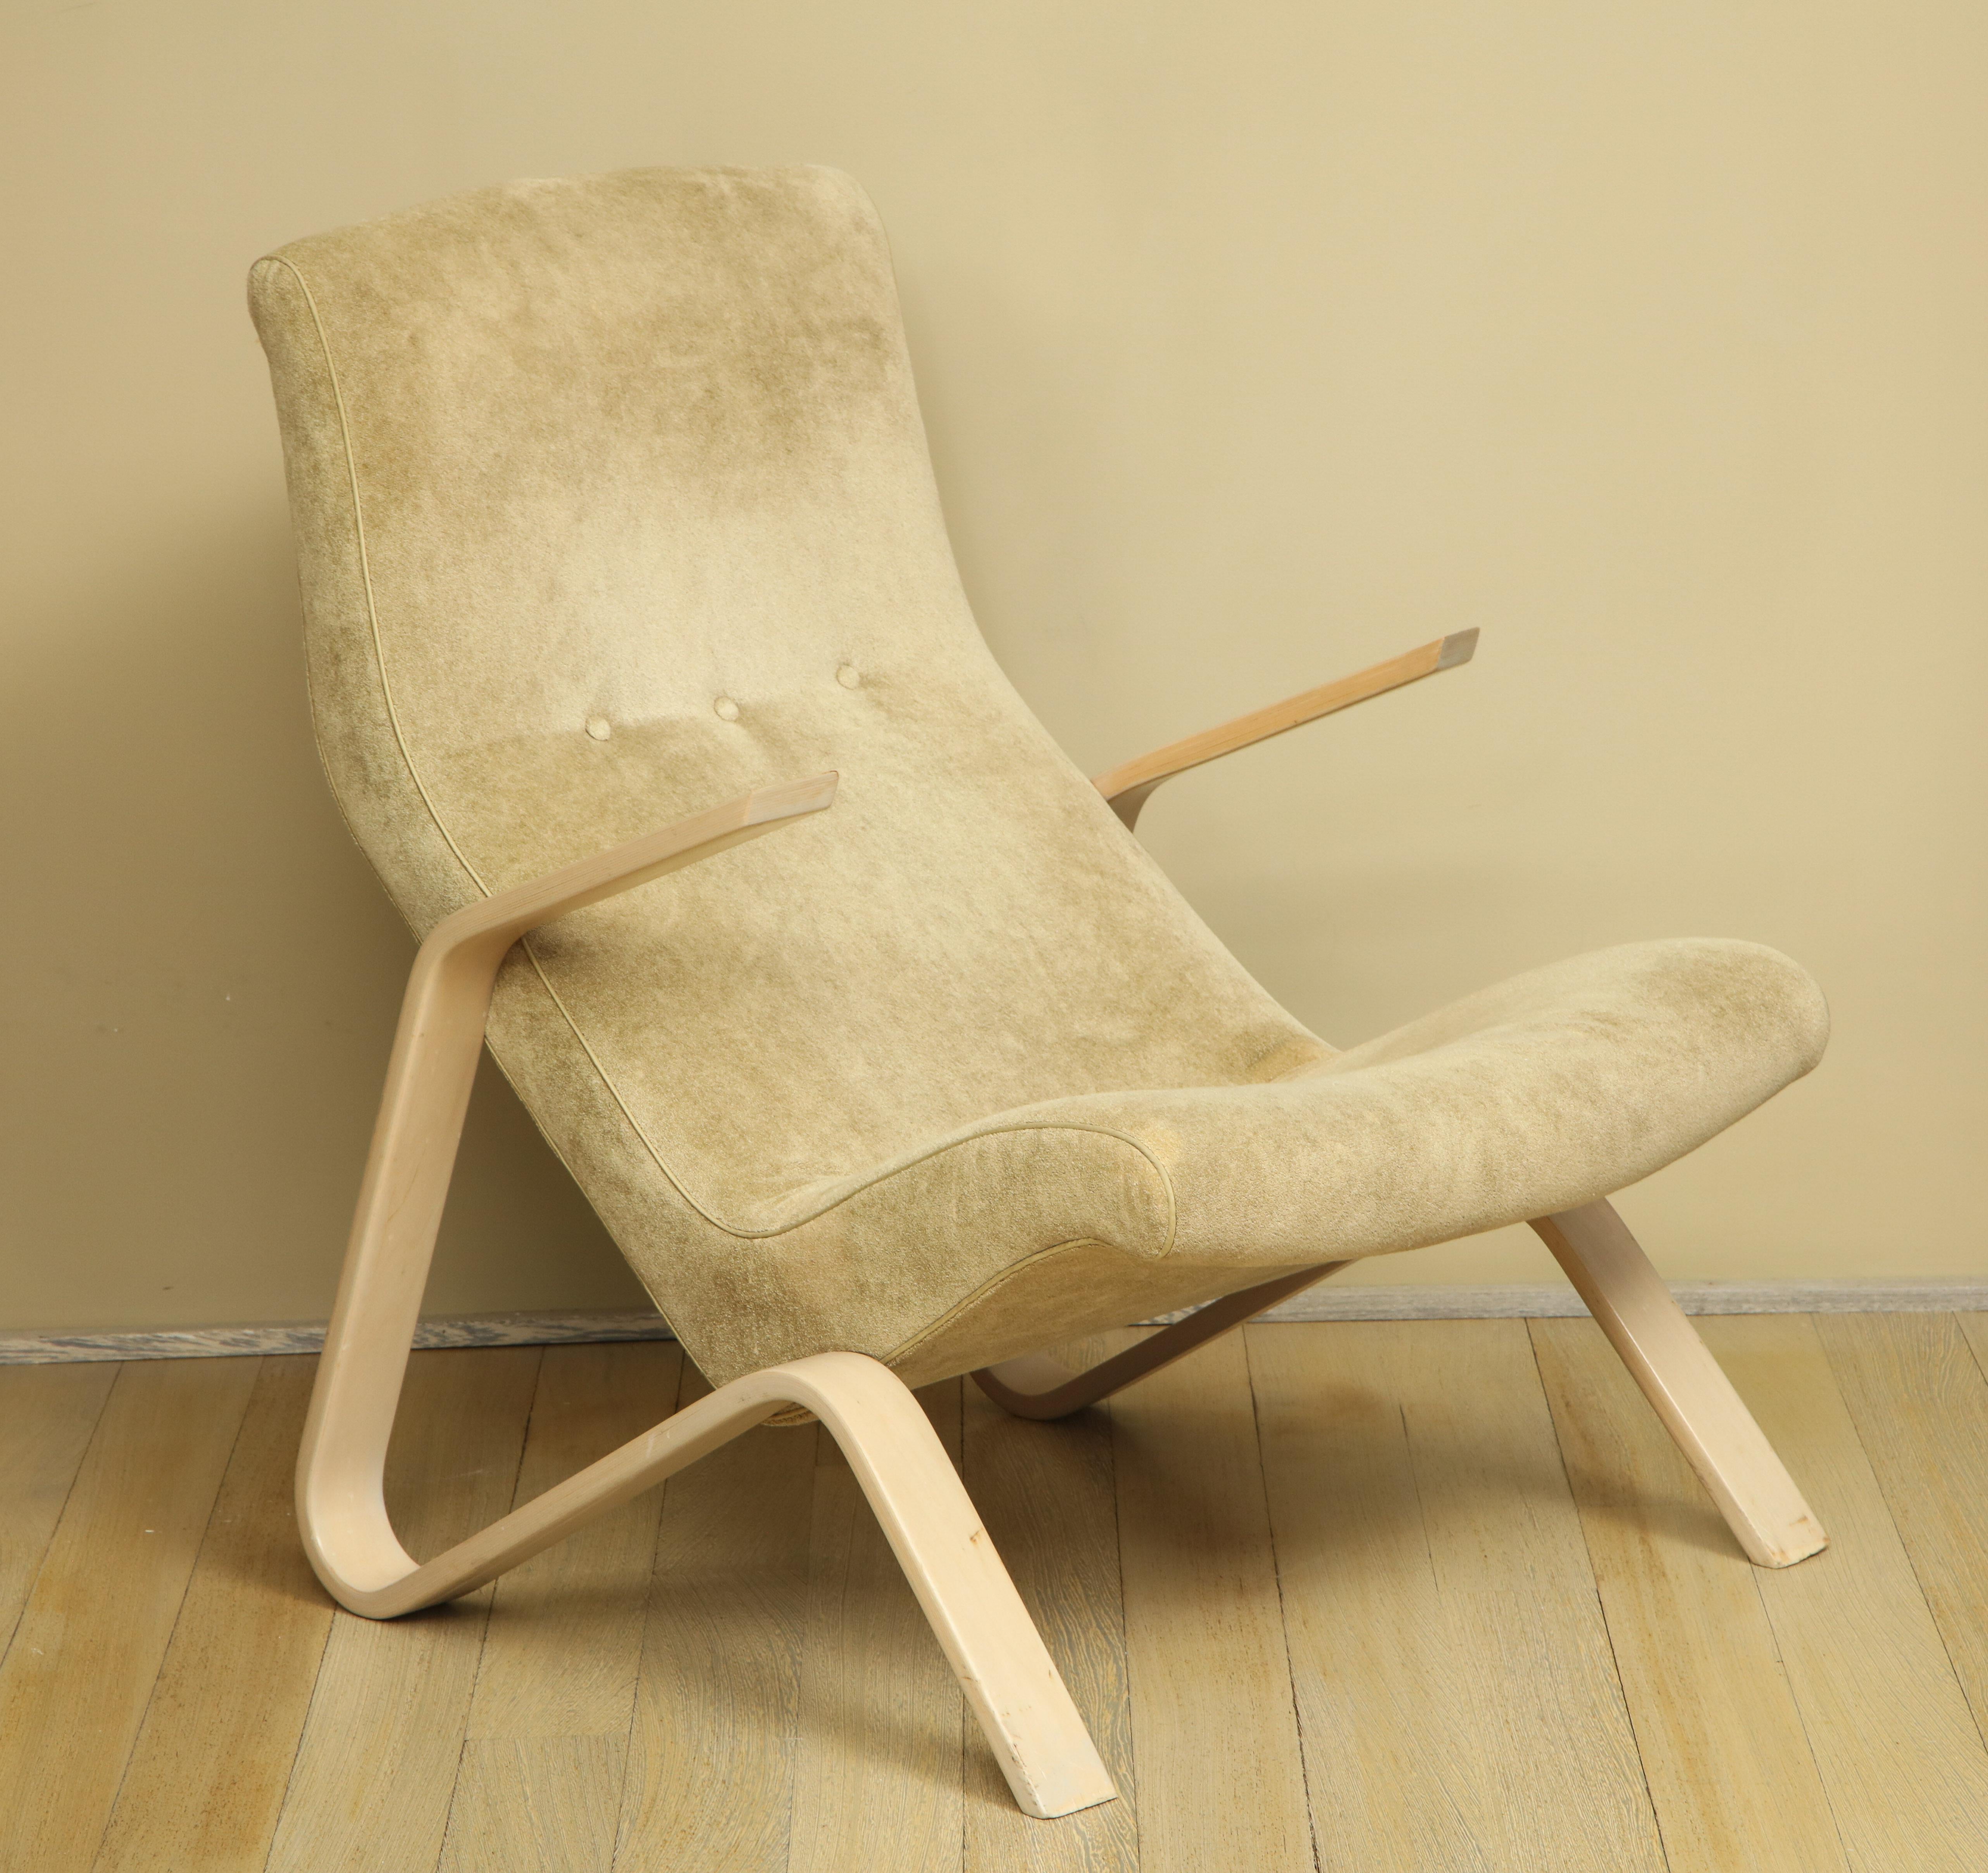 Vintage Grasshopper Armchair by Knoll 5